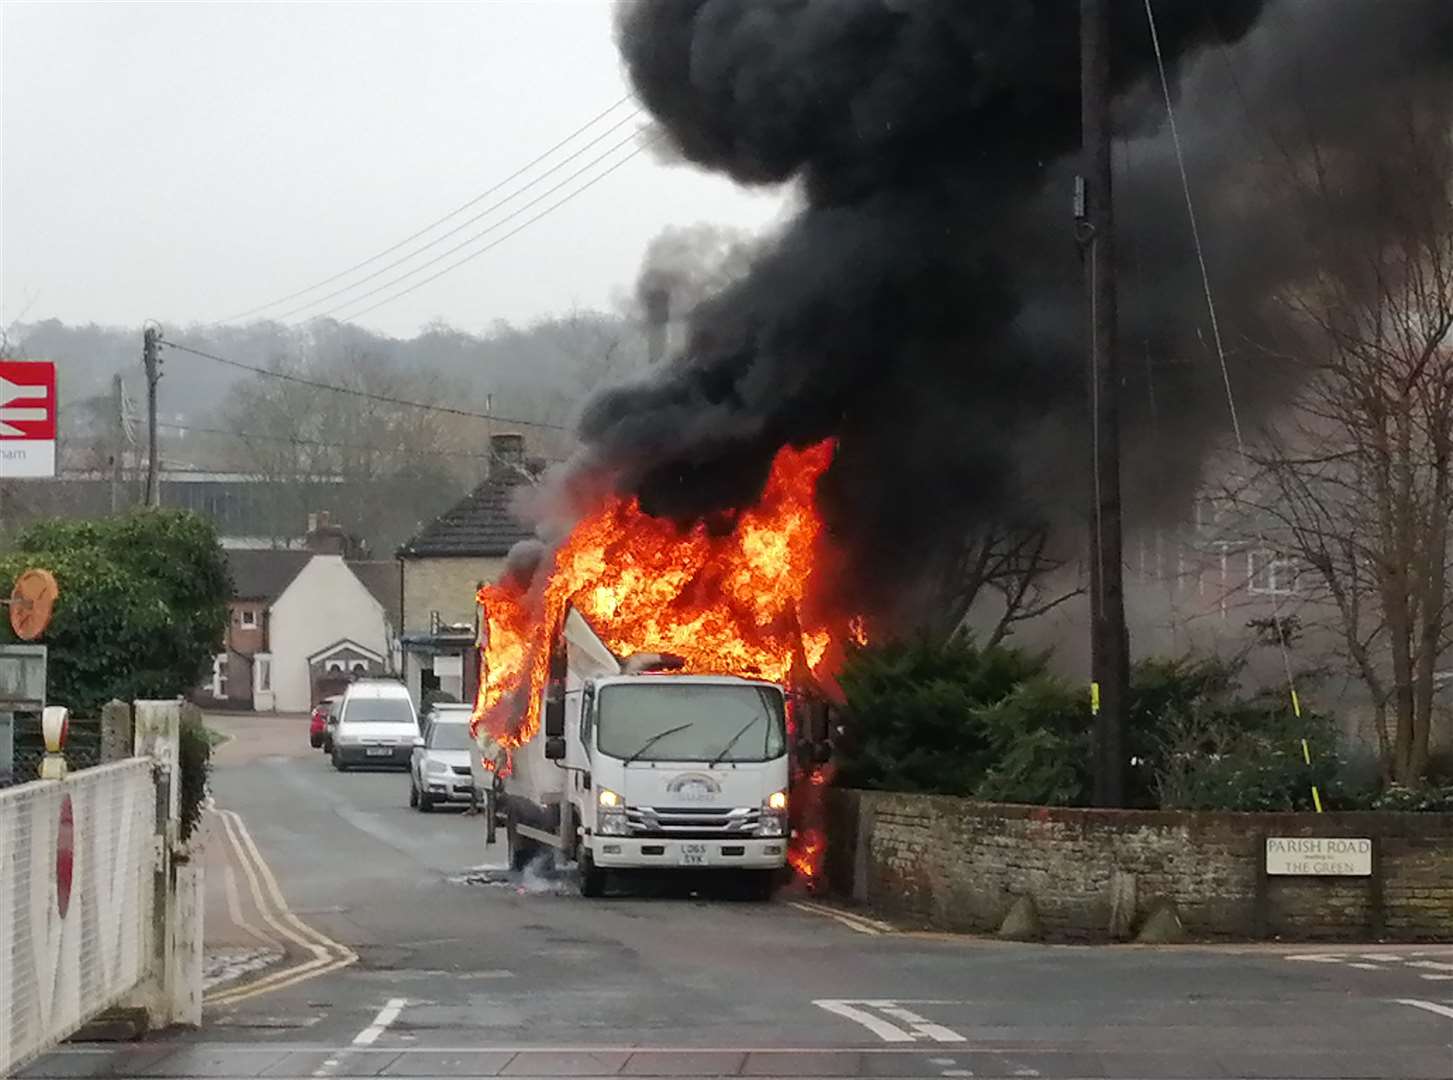 A lorry caught fire close to a level crossing in Chartham near Canterbury